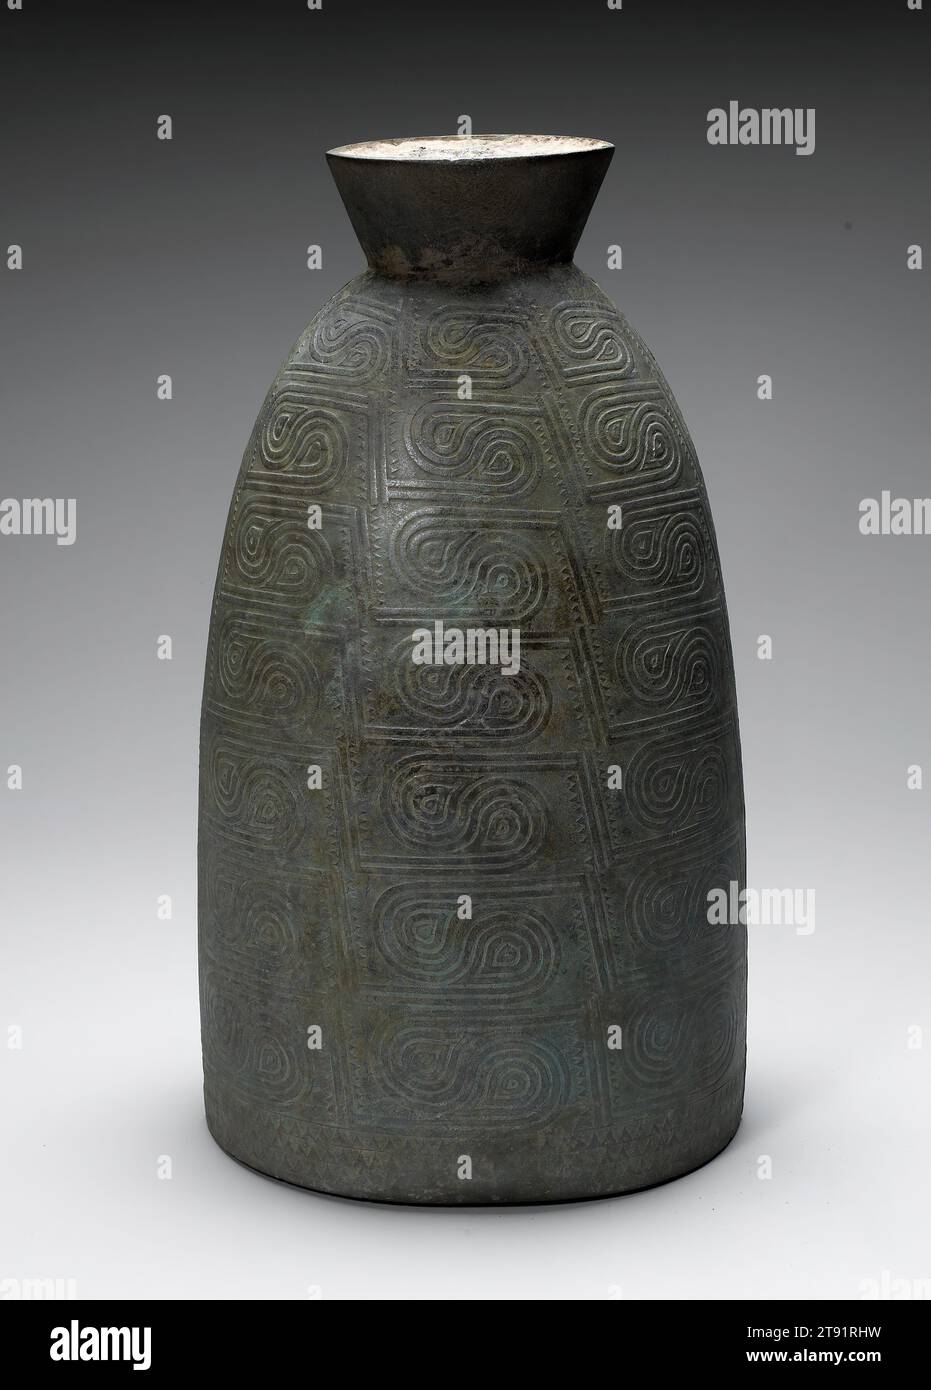 Ceremonial Bell, 3rd-2nd century BCE, 23 5/16 x 12 15/16 x 11 1/4 in. (59.21 x 32.86 x 28.58 cm), Bronze, Vietnam, 3rd-2nd century BCE, The attenuated form, repeated double-spiral decoration, and lines with sawtooth markings are motifs unique to Don Song culture (400 BCE–200 CE), a pan-Southeast Asian civilization inhabiting regions of Vietnam, Cambodia, Thailand, Yunnan province in China, and Indonesia. In the first millennium BCE, Don Song production of magnificent large bronzes increased. This bell was cast using the piece-mold process developed by neighboring Chinese bronze-founders Stock Photo